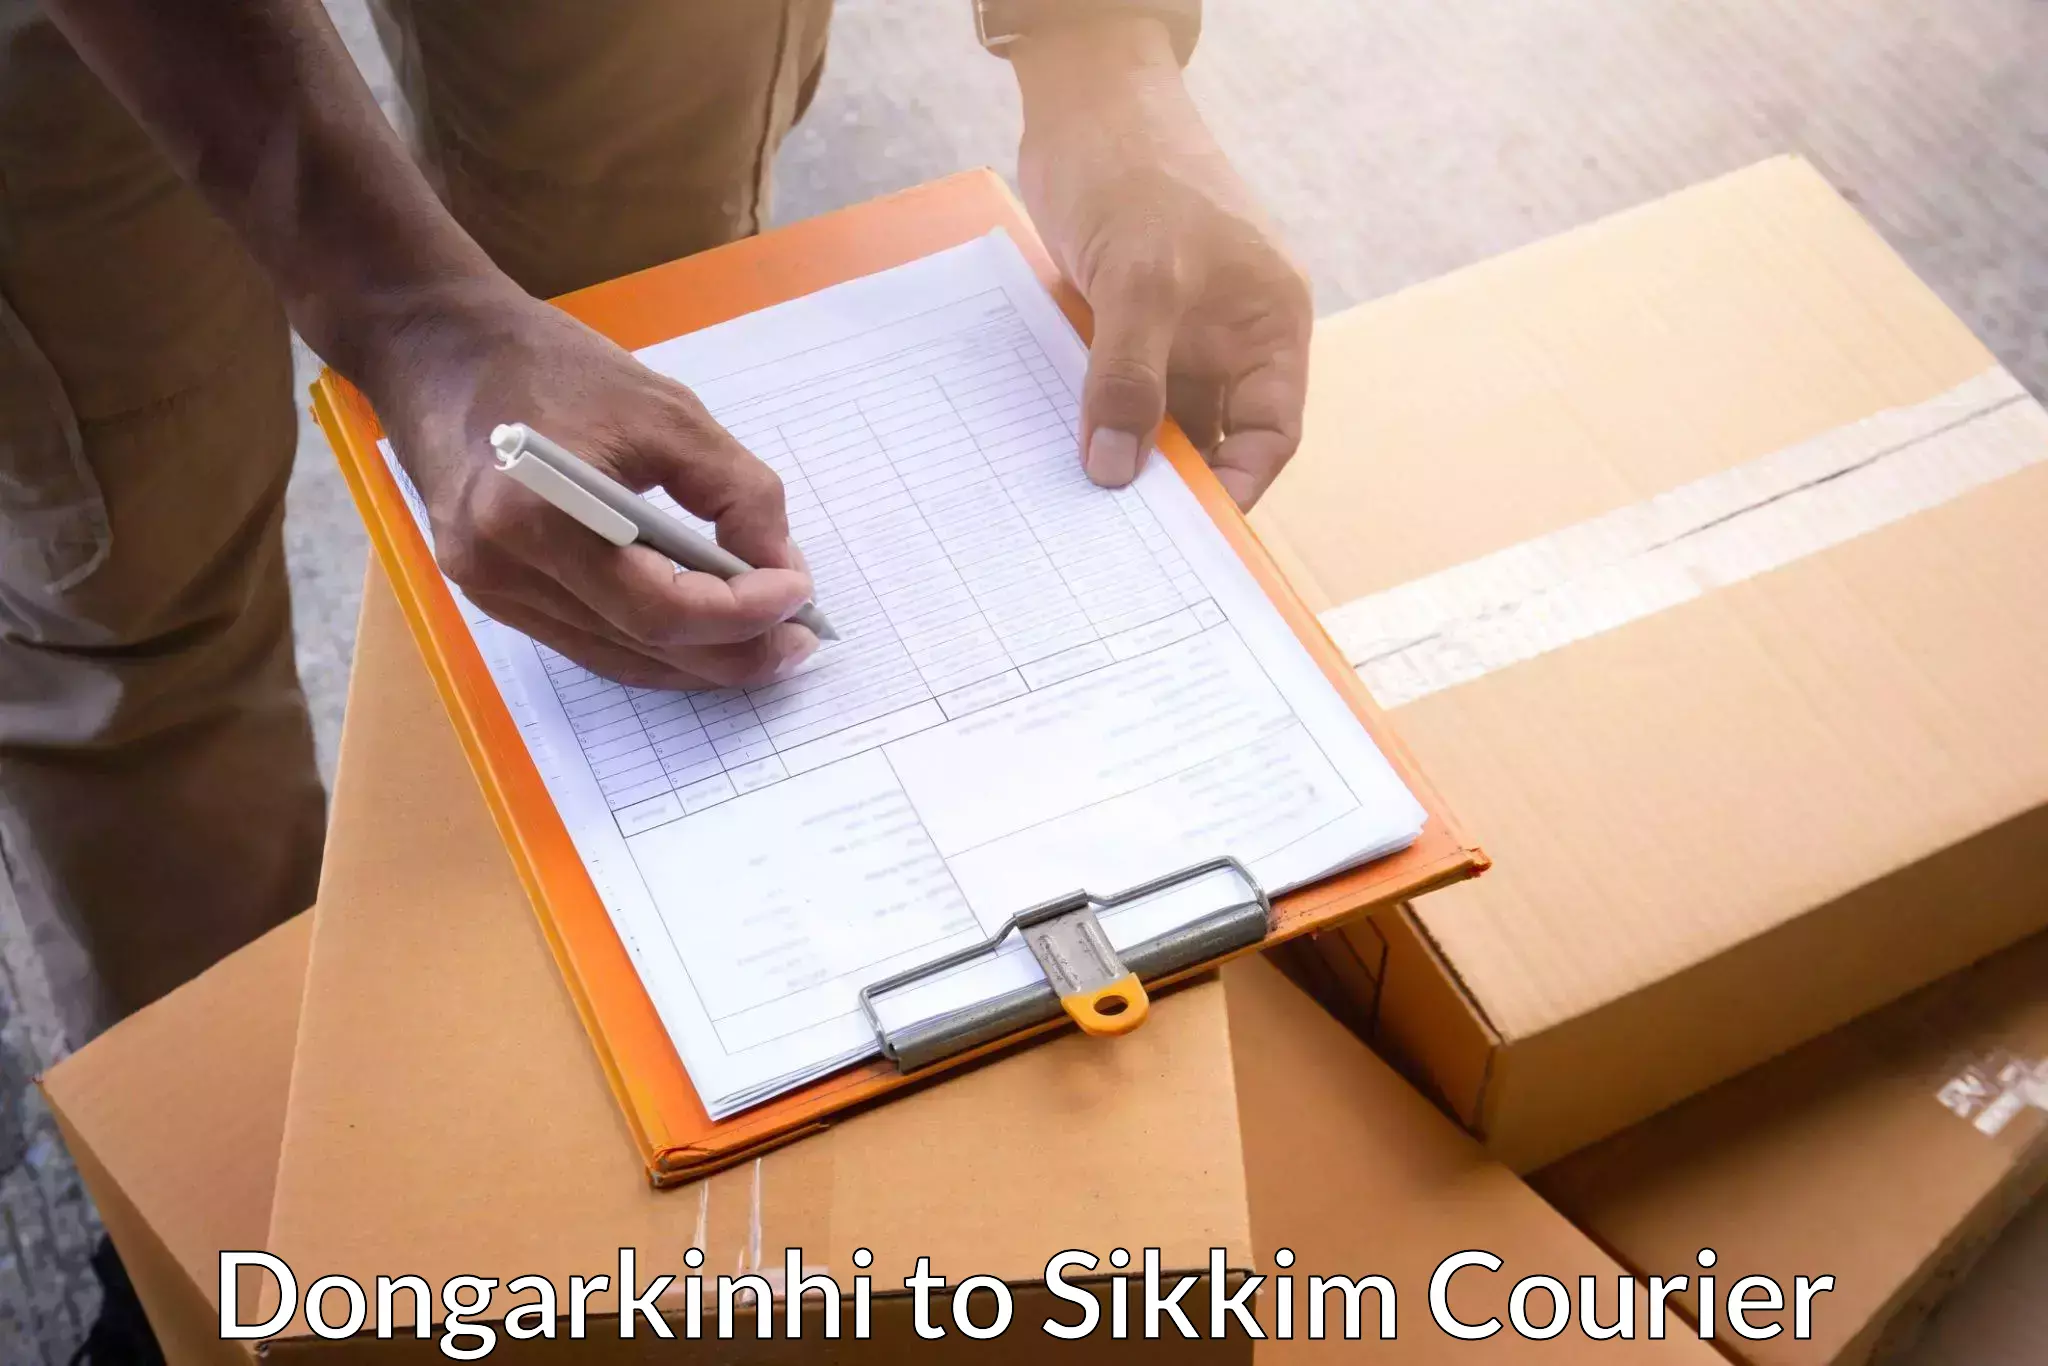 Professional parcel services Dongarkinhi to South Sikkim